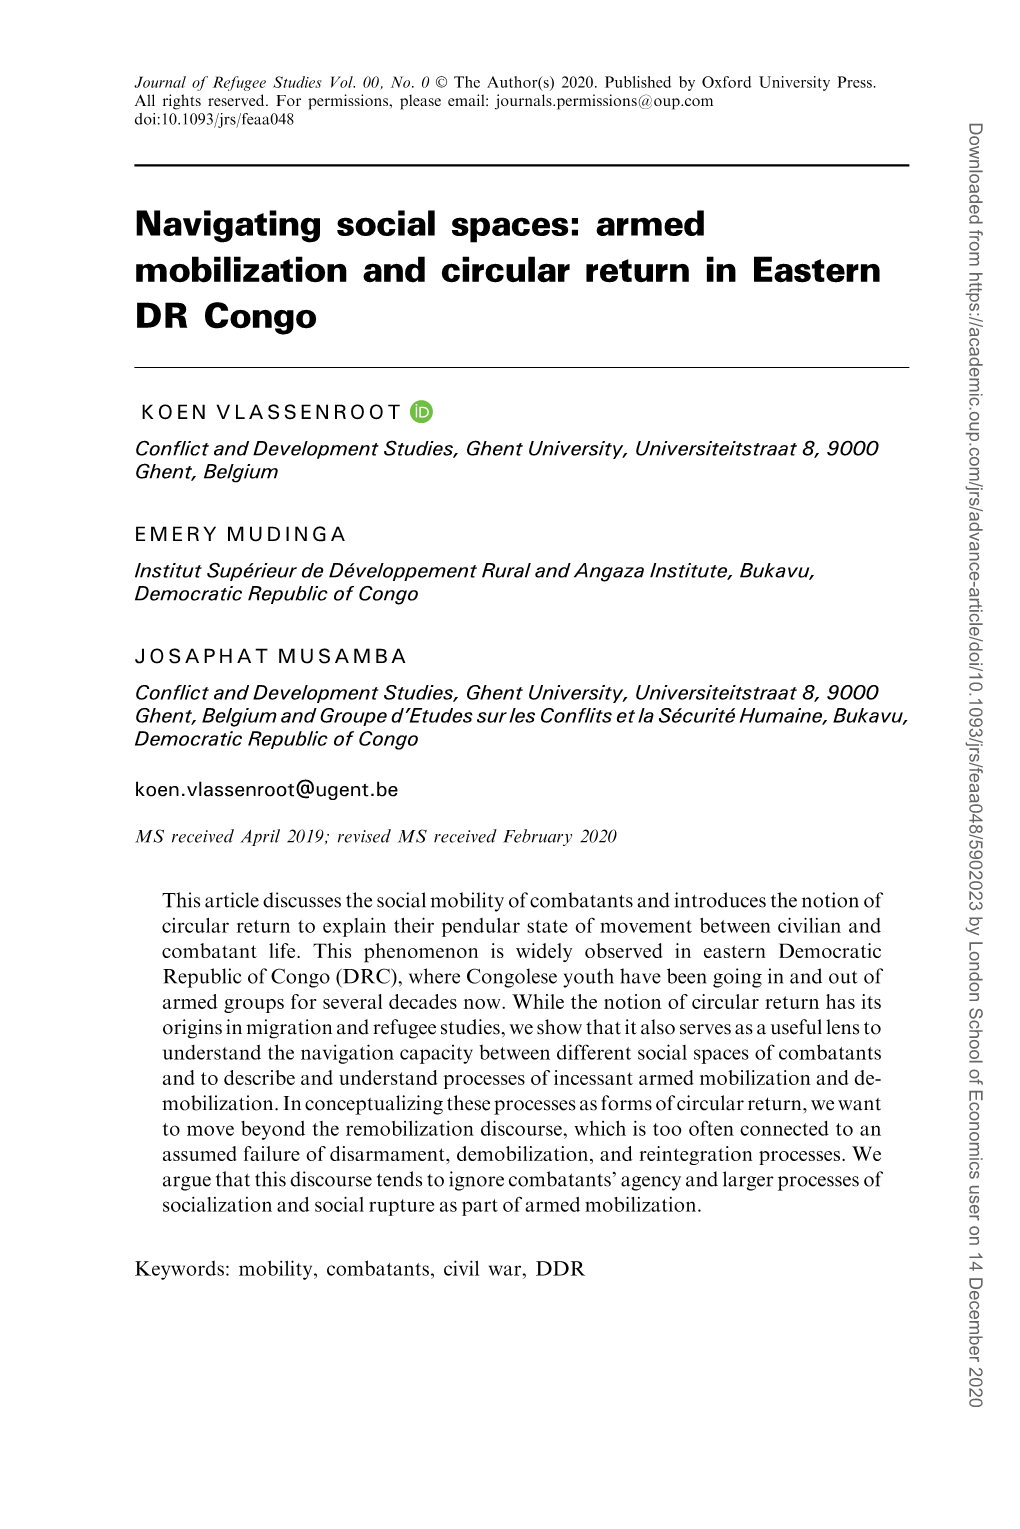 Navigating Social Spaces: Armed Mobilization and Circular Return in Eastern DR Congo